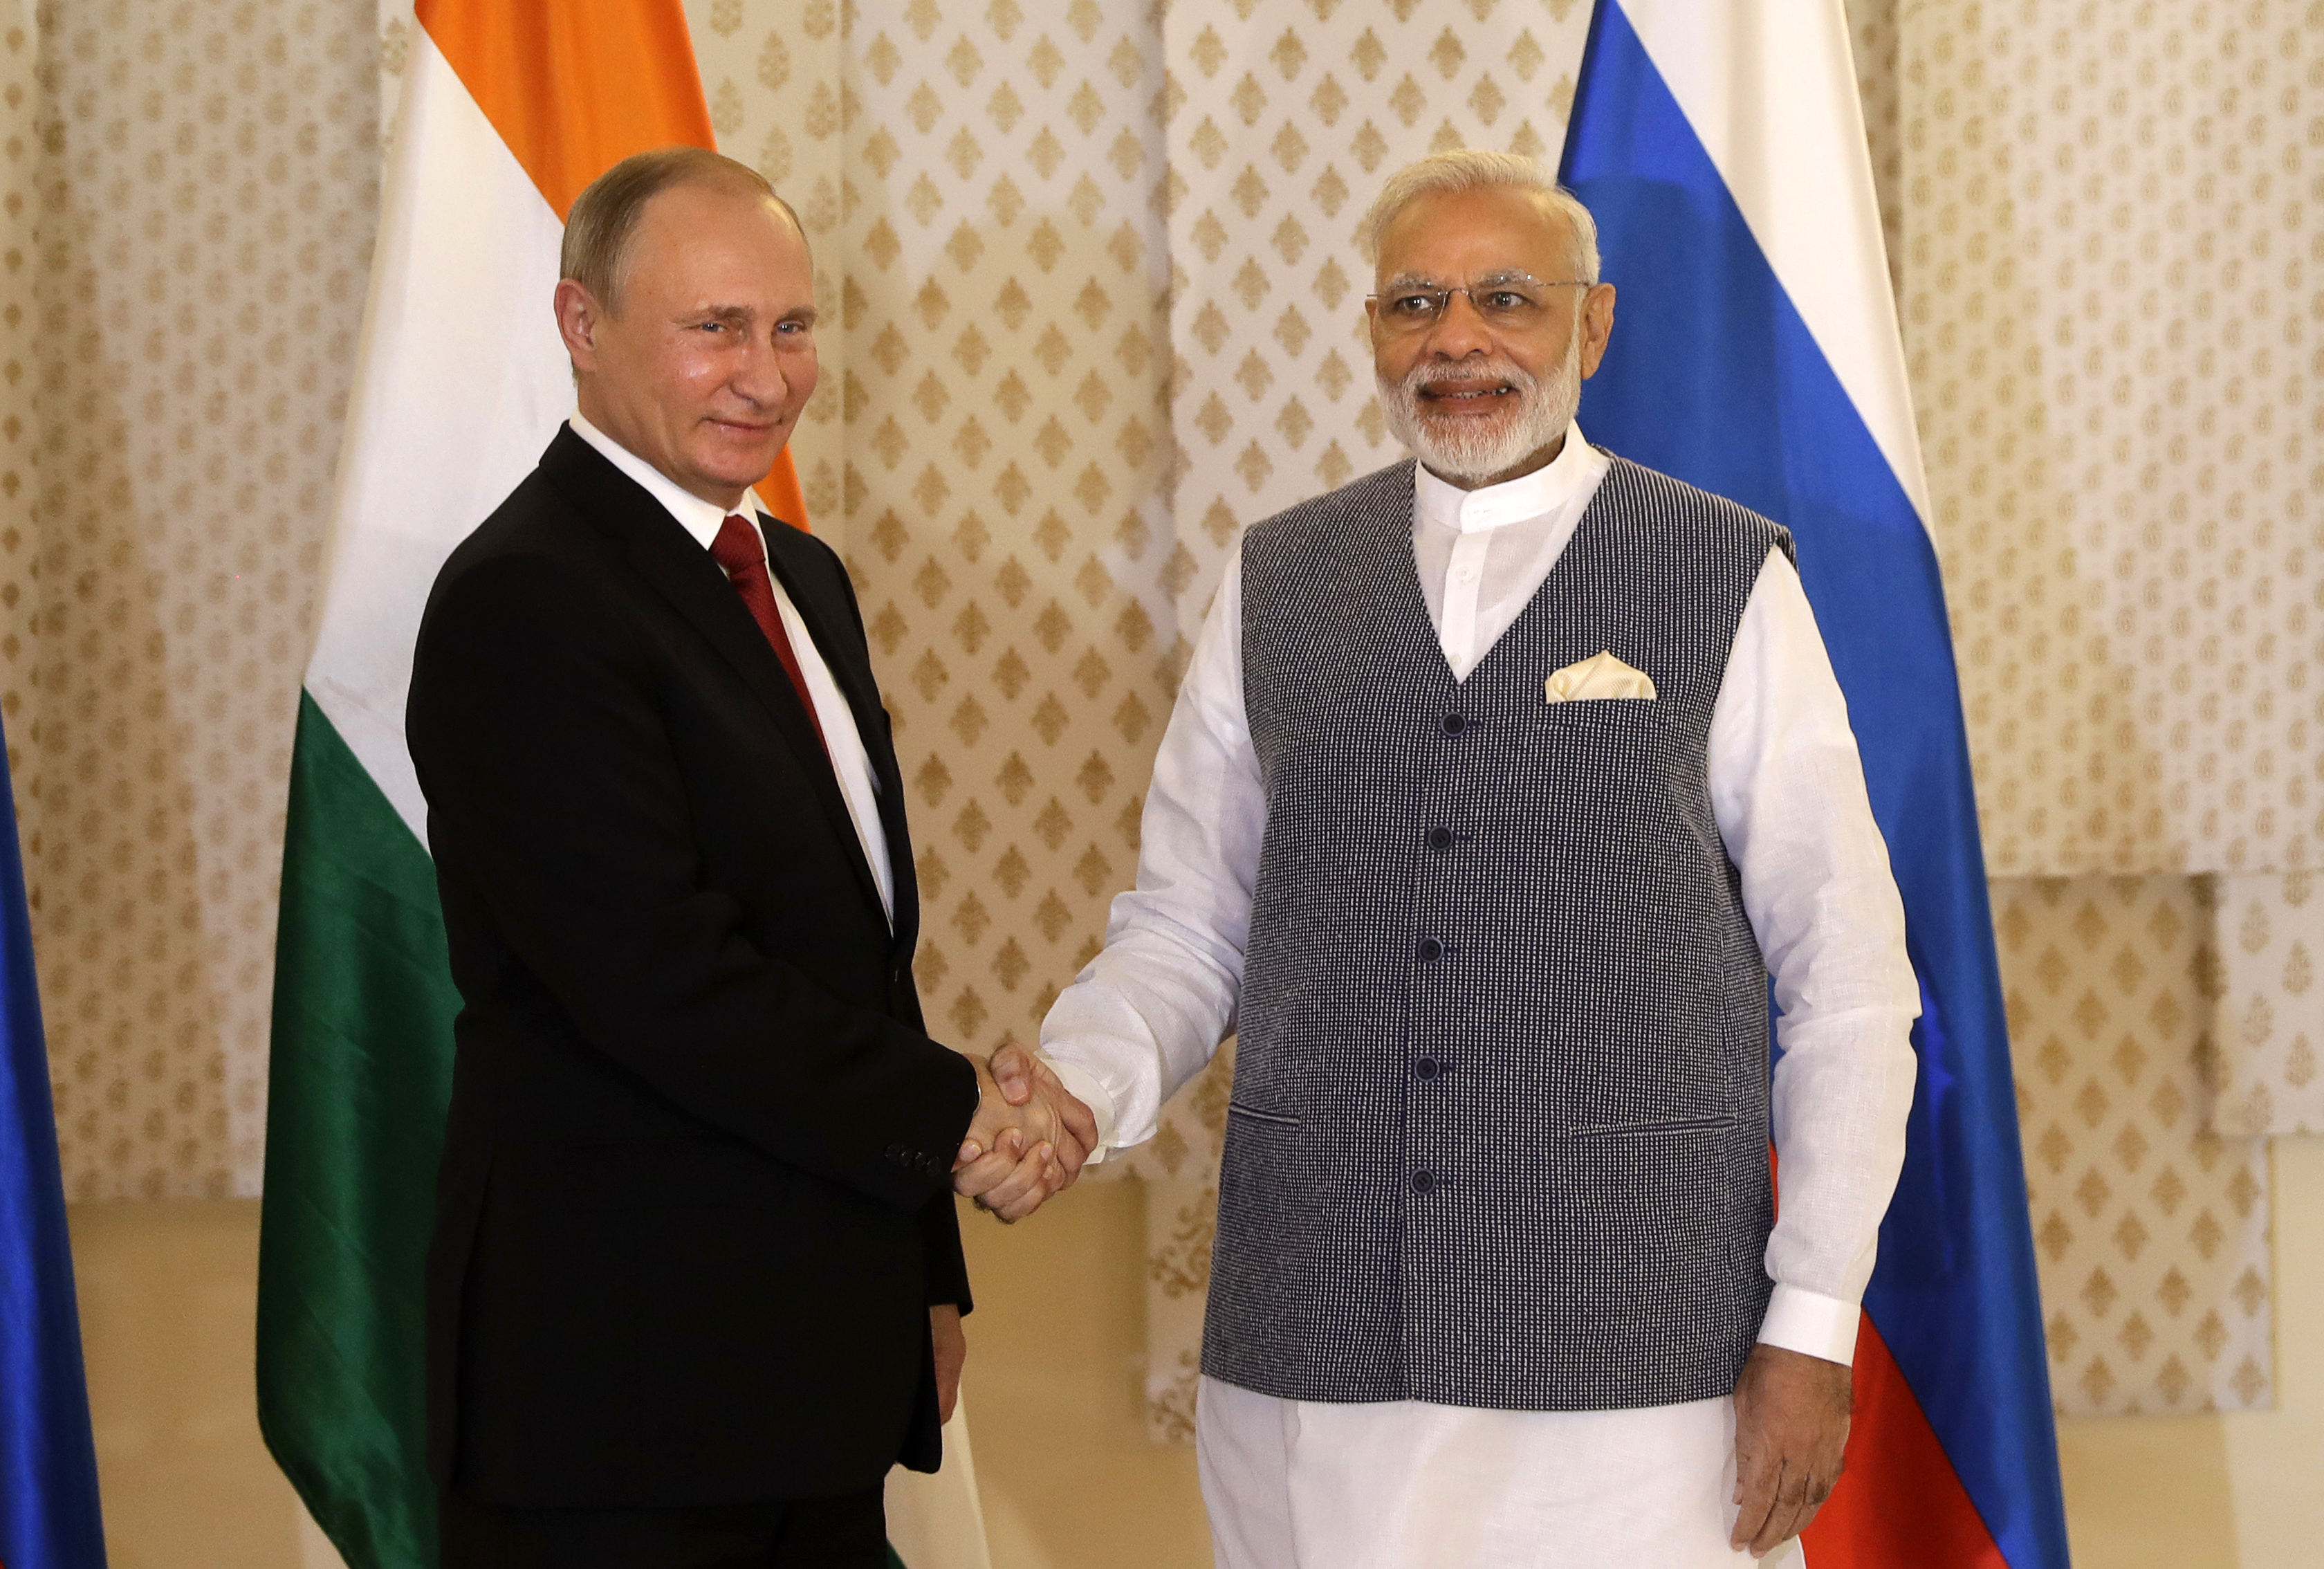 Indian Prime Minister Narendra Modi shakes hand with Russian President Vladimir Putin prior to their annual bilateral meeting, on the sidelines of the BRICS summit, in Goa, 2016.